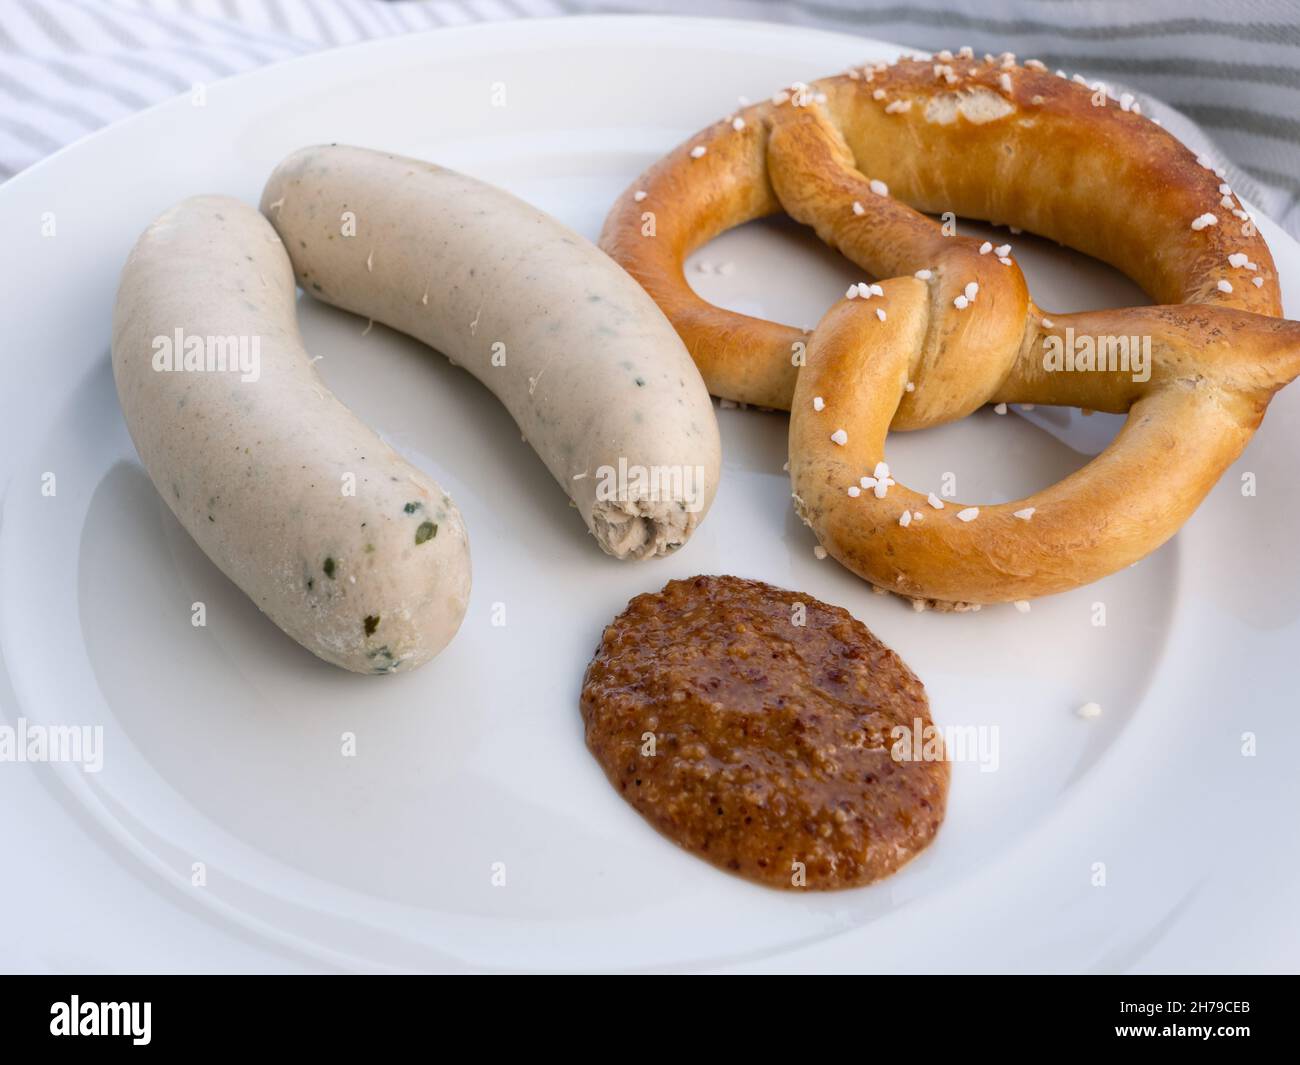 Weisswurst Bavarian or German White Sausage Pair with Pretzel and Sweet Mustard Stock Photo